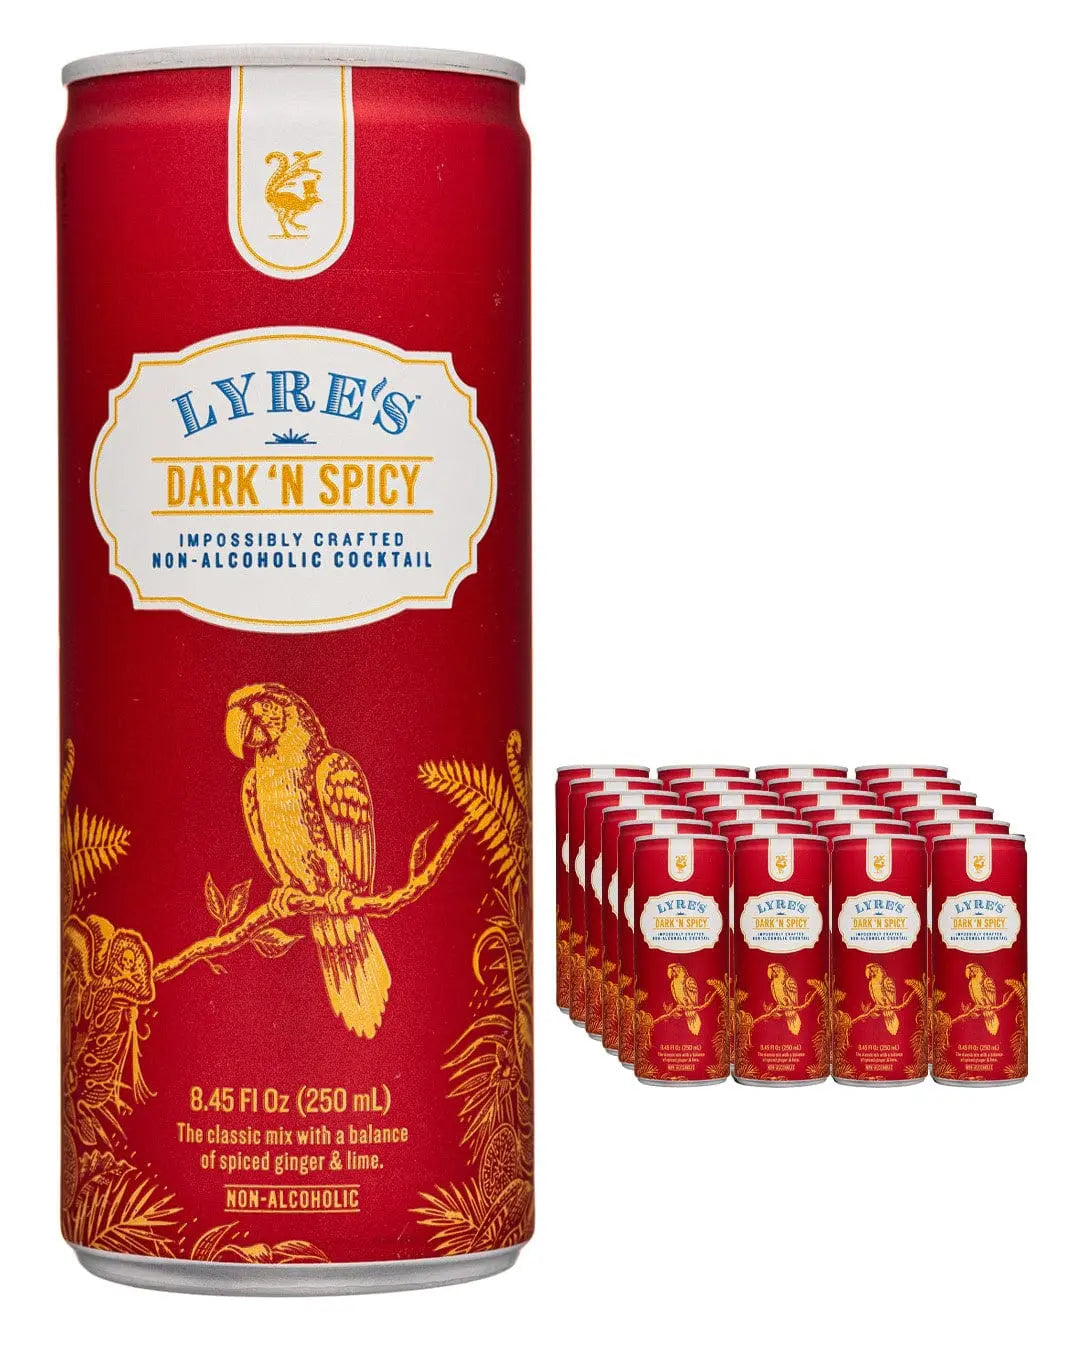 Lyre's Dark 'n Spicy Premix Non Alcoholic Drinks Multipack, 24 x 250 ml Ready Made Cocktails